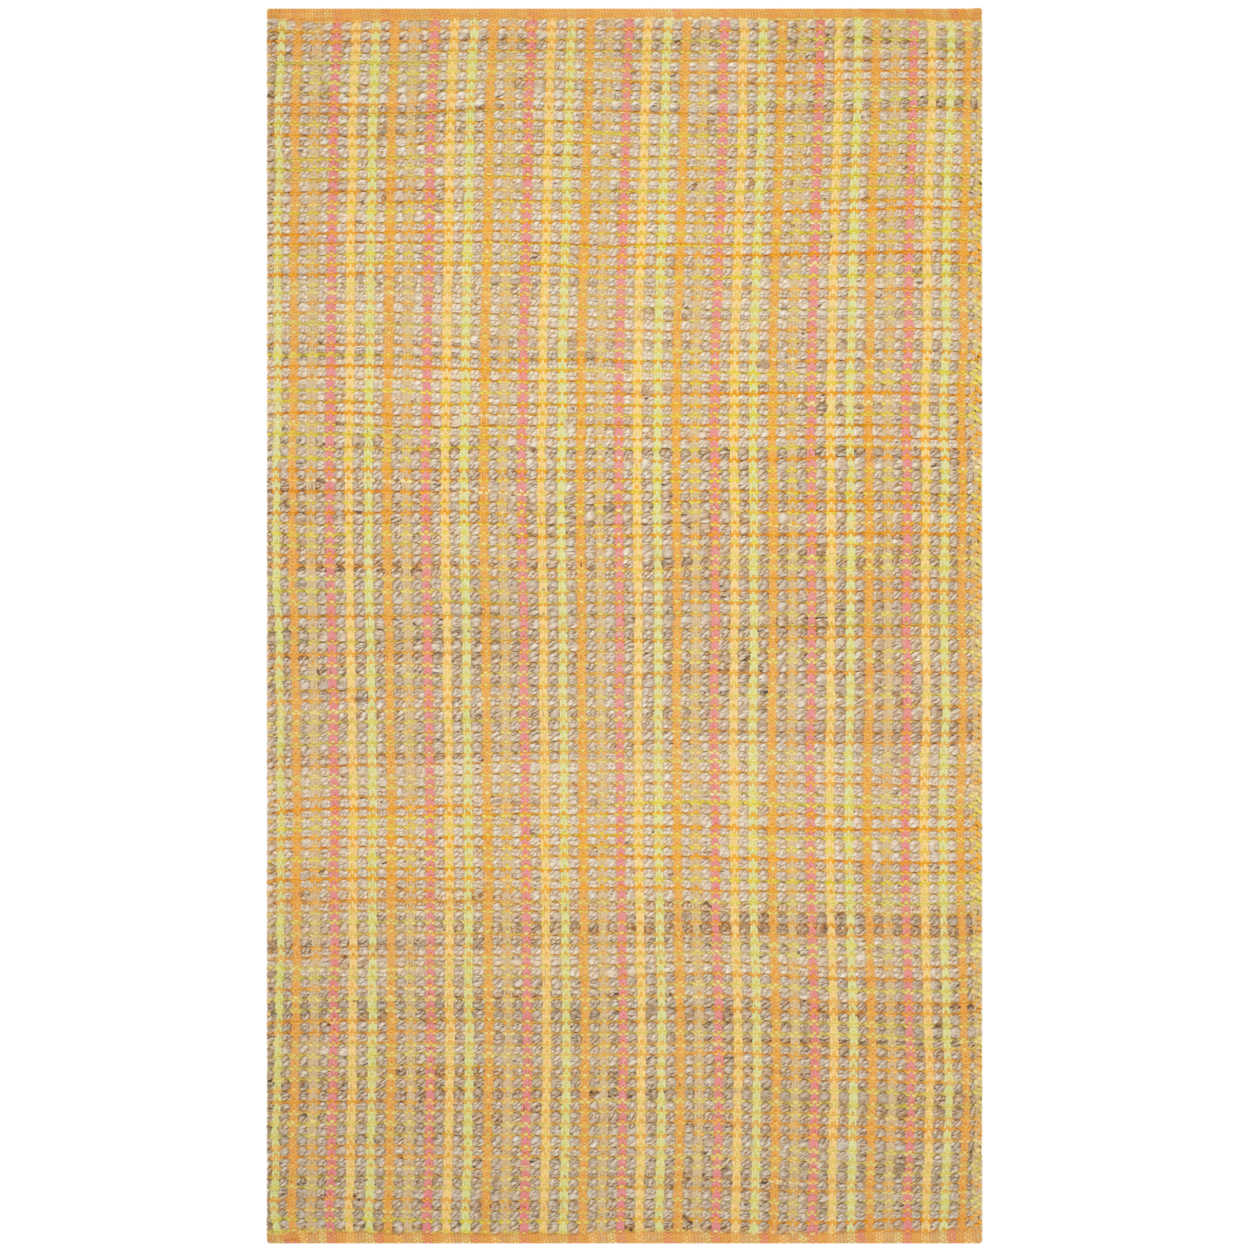 SAFAVIEH Cape Cod Collection CAP831D Handwoven Spring Rug - 8' X 10'